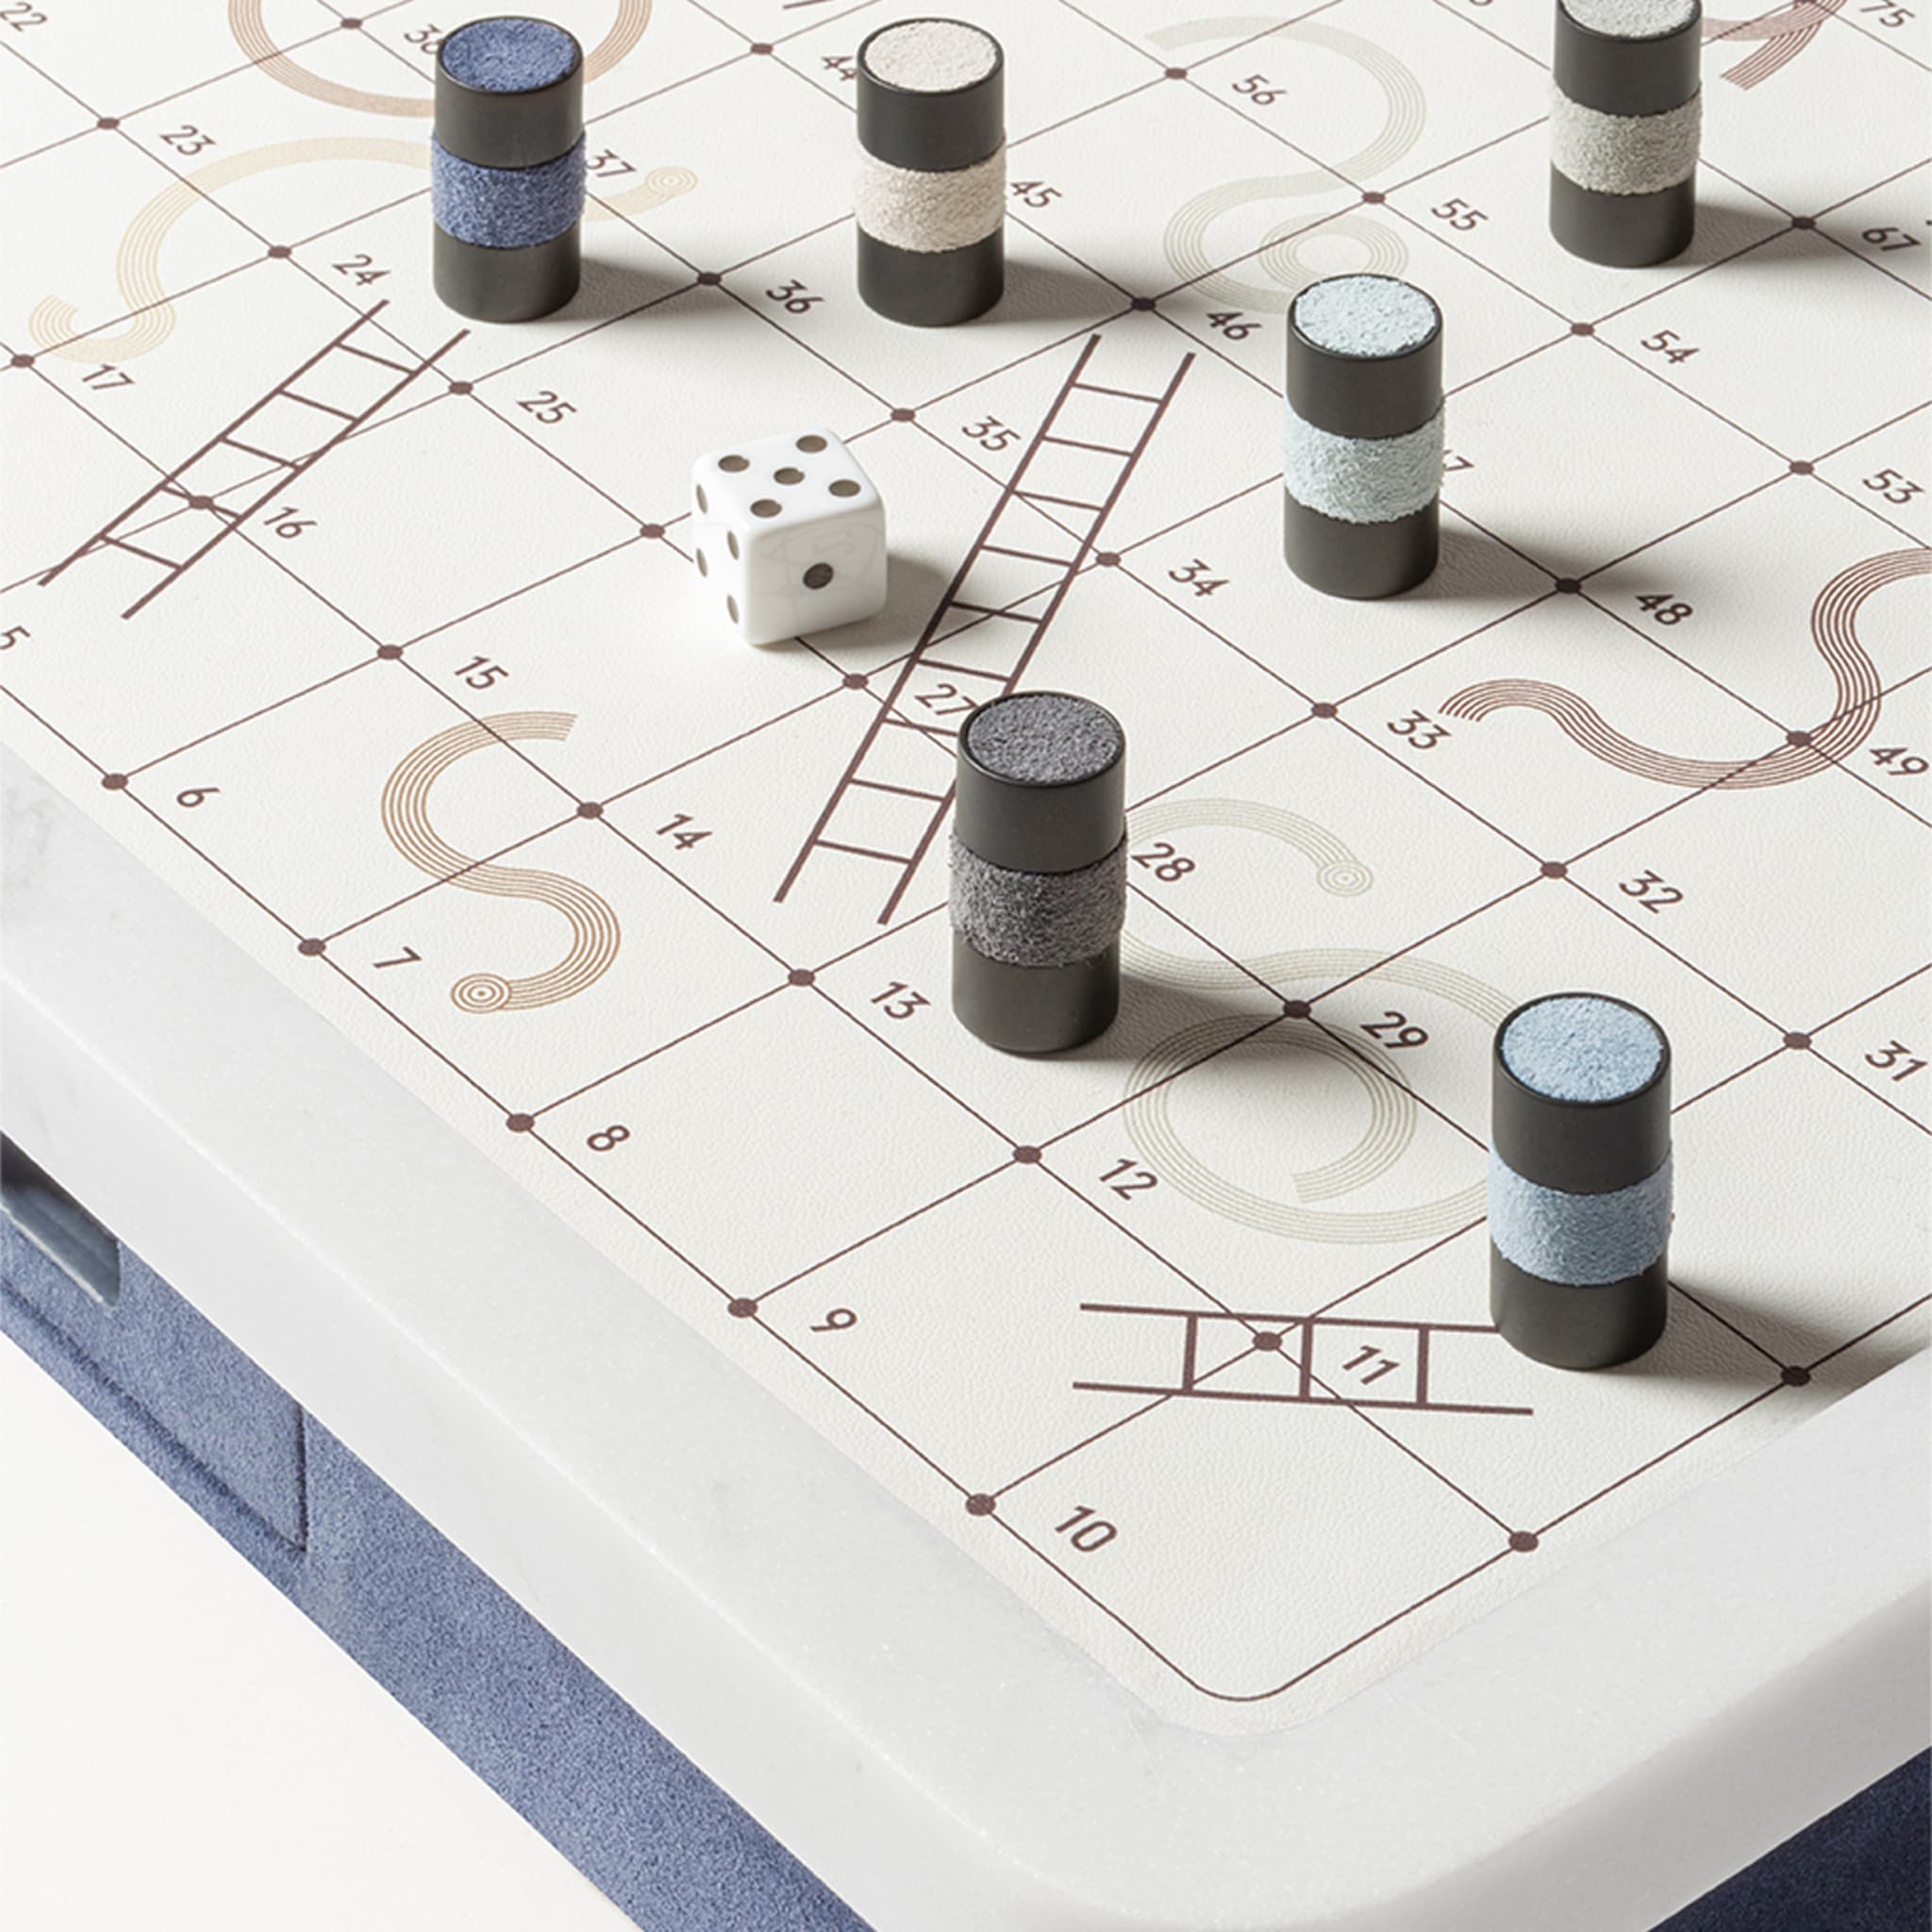 Delos Snakes & Ladders Game Set - Alternative view 1